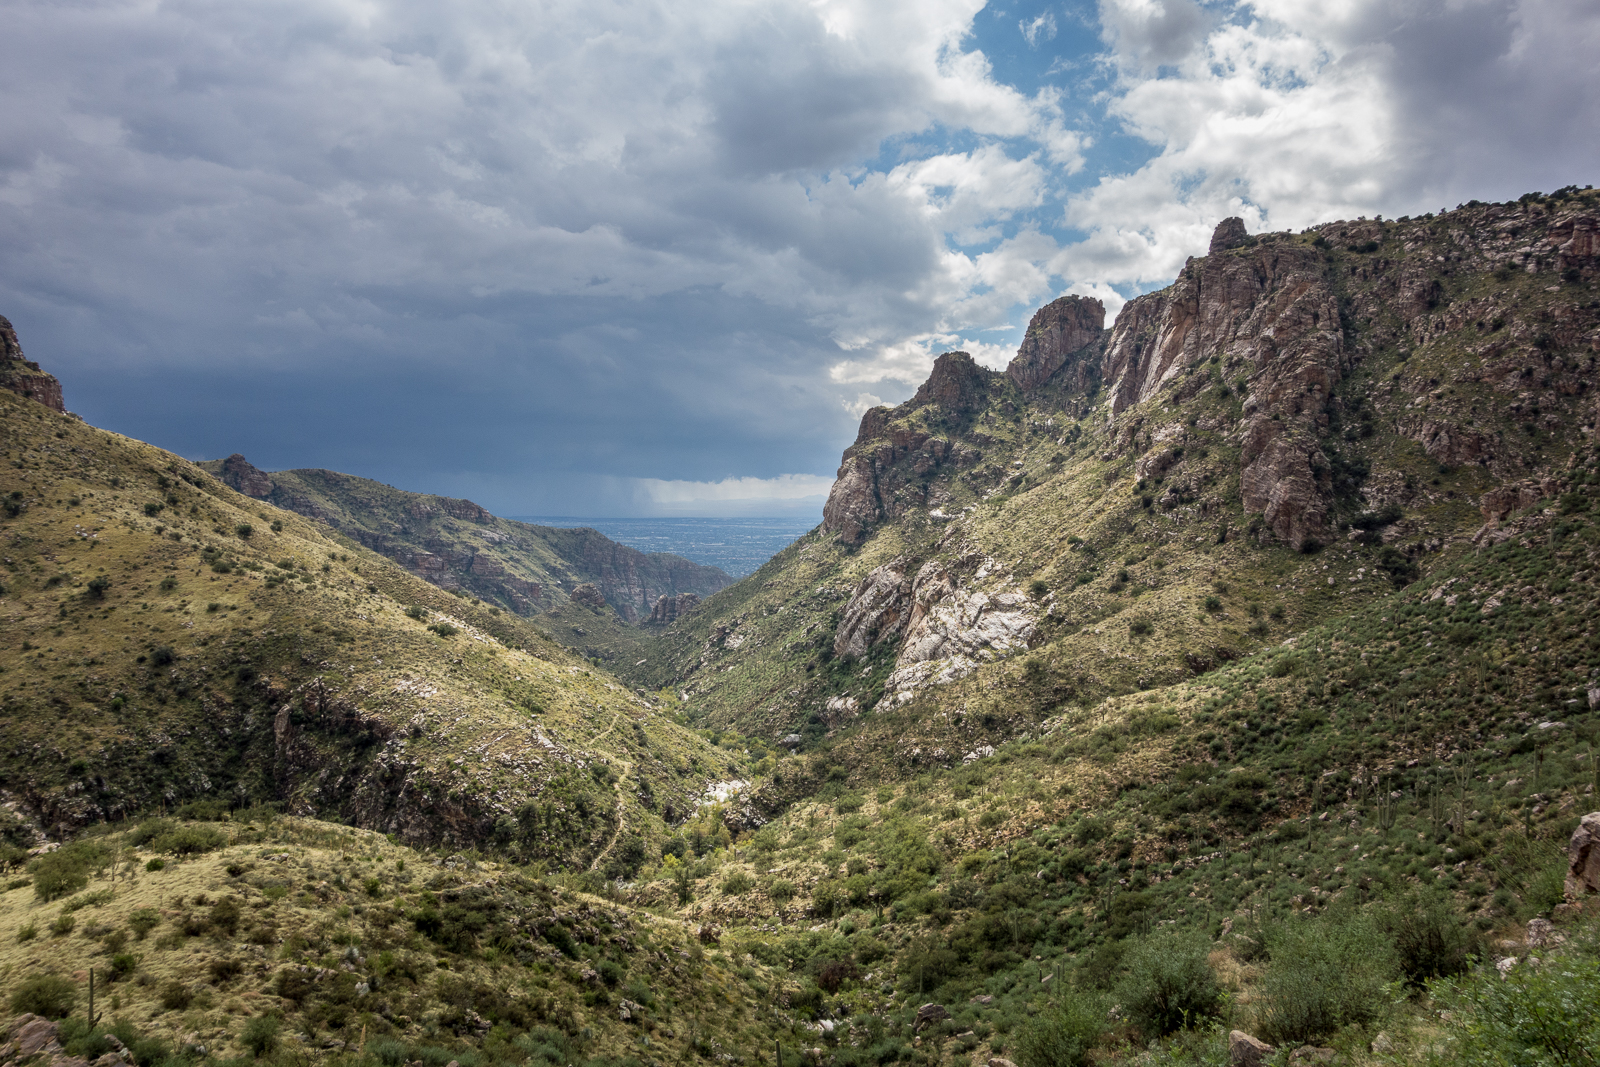 Looking down Bear Canyon - rain in Tucson and a break in the clouds above. October 2015.